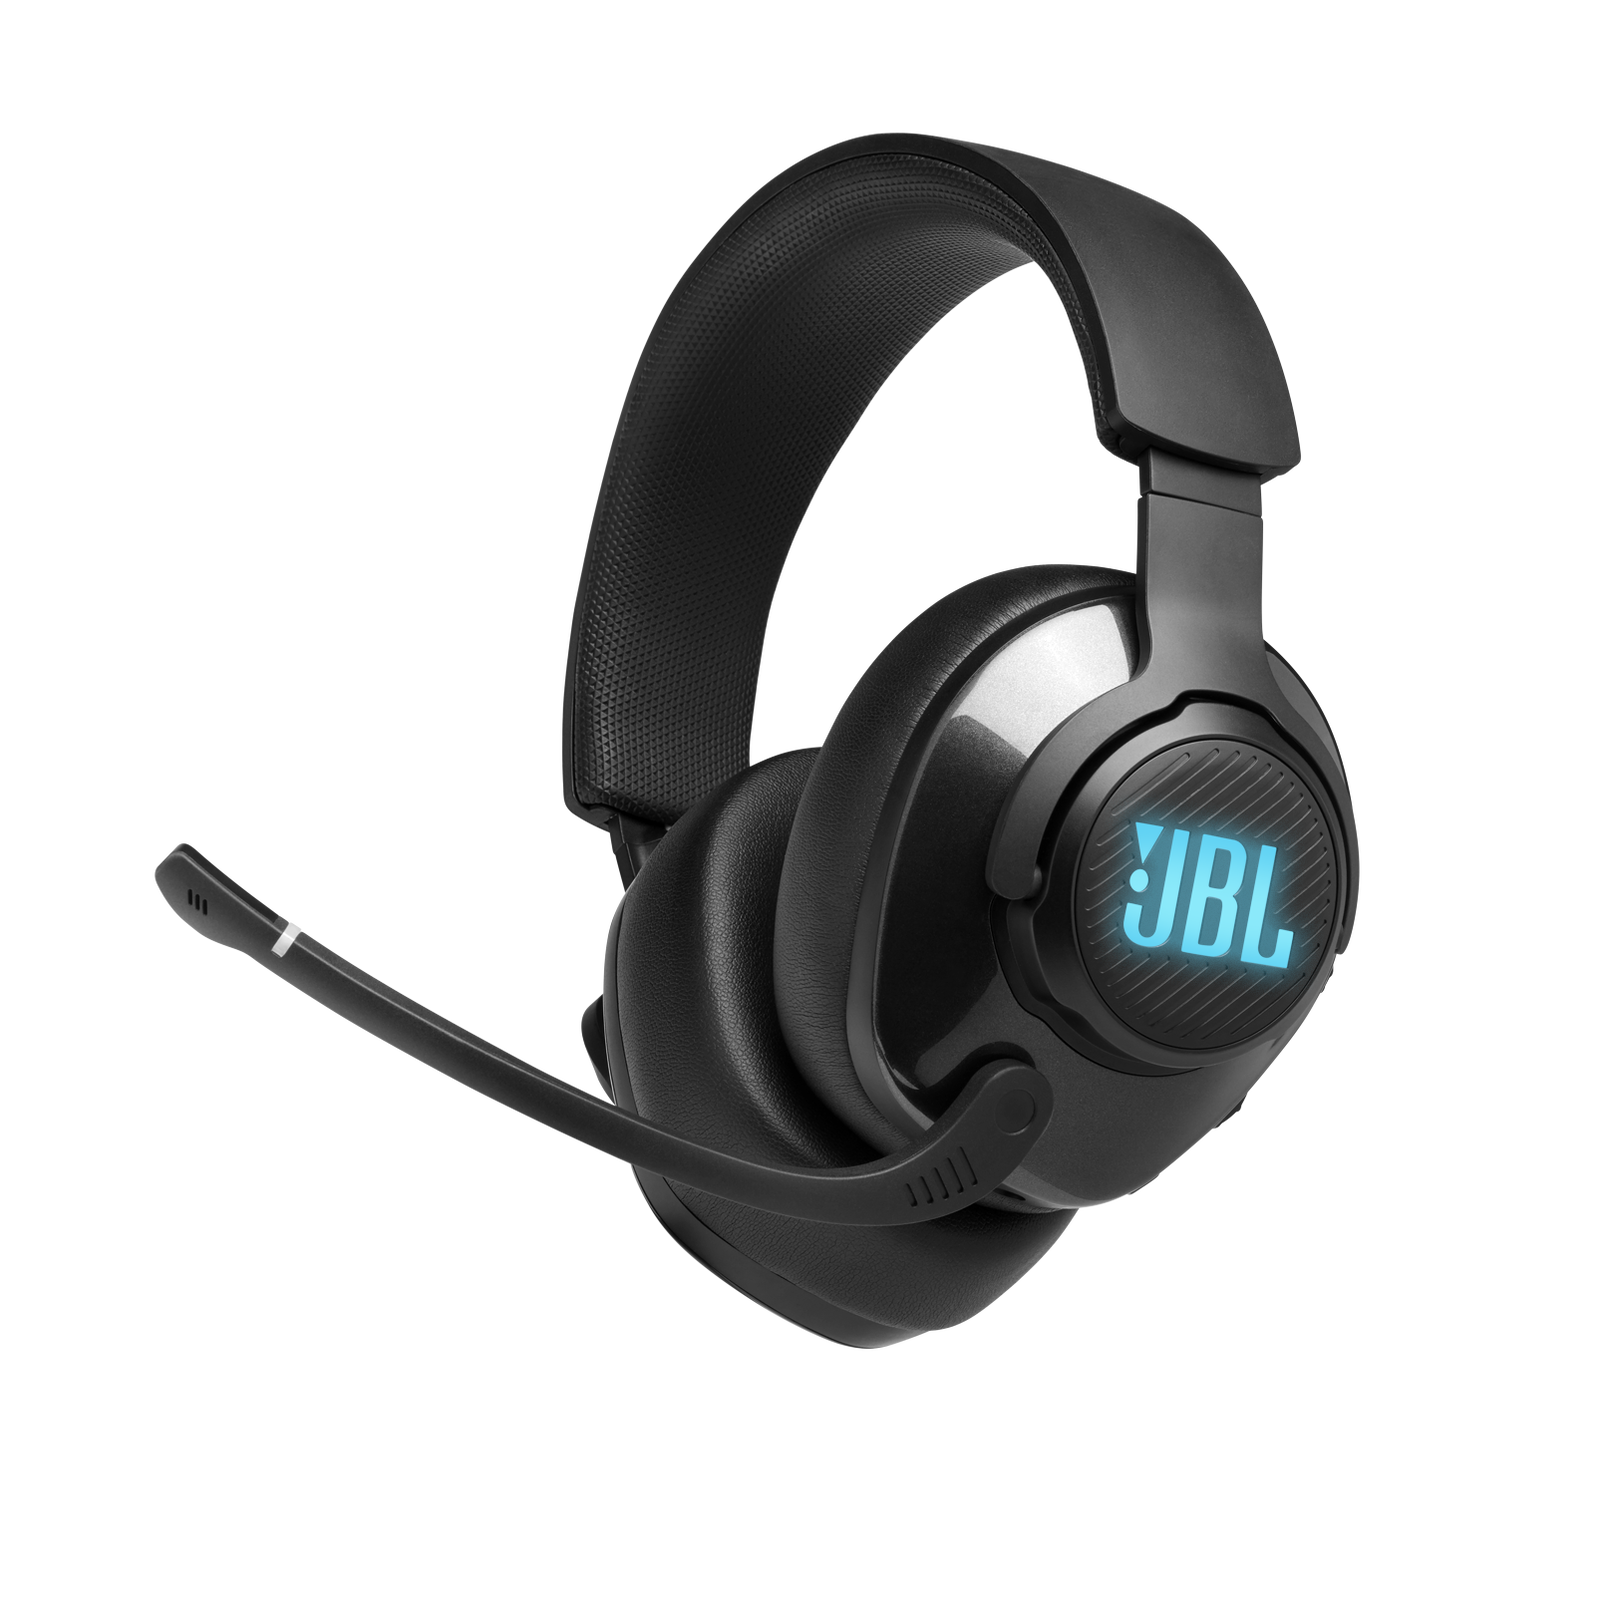 JBL Quantum 400 Black | Over-Ear Wired Gaming Headset - JBL 7.1 Surround Sound & Mic Noise Cancelling - PS5/XBOX One/Switch/PC Compatible Gaming Headset